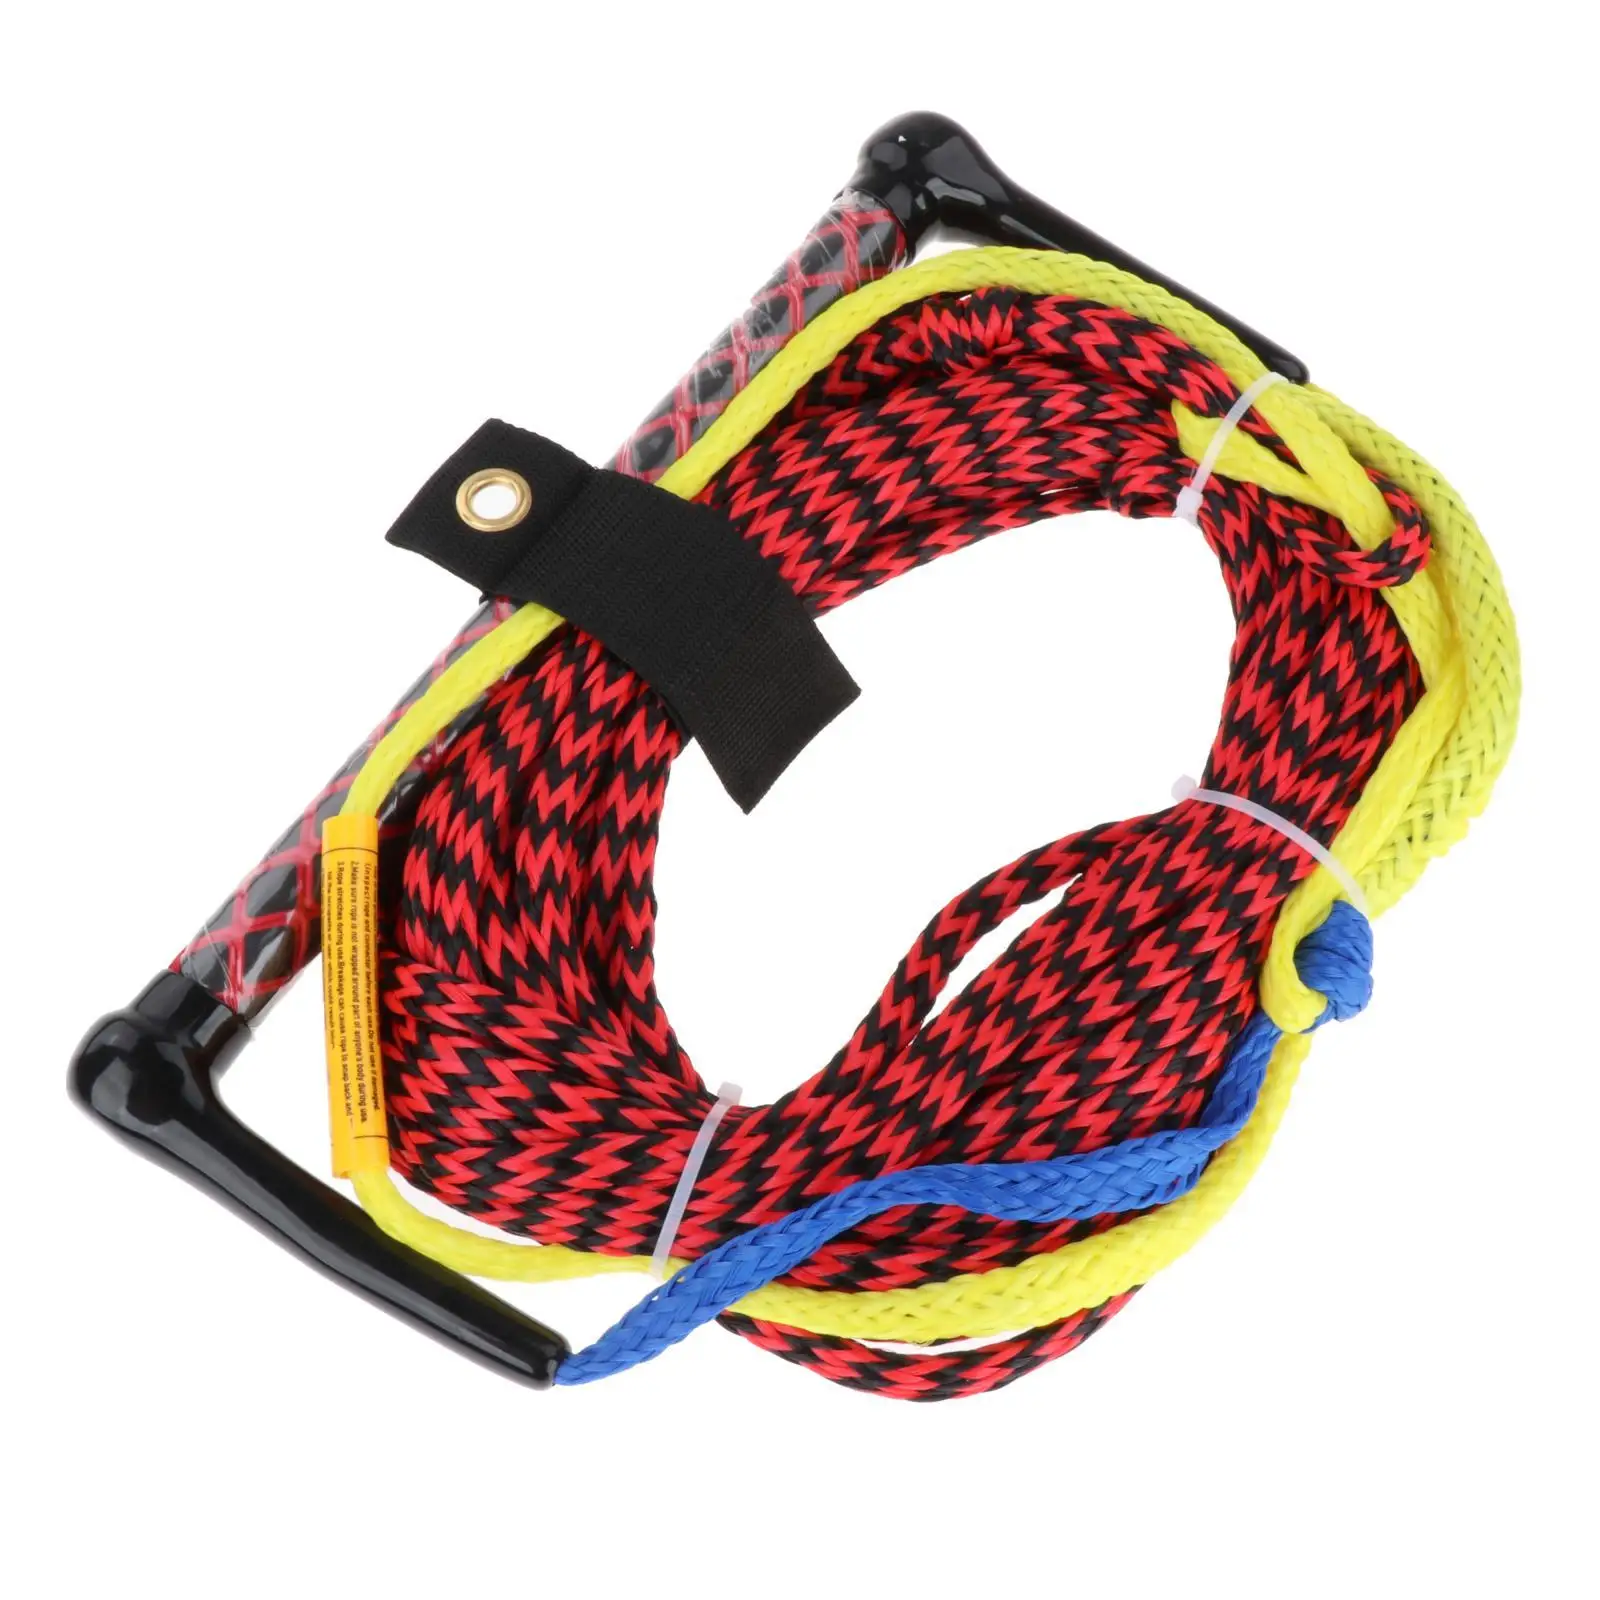 Water Skiing Surf Rope Floatable Tow Surfing Tow Trow Ropes Line Tow Harness Rope w/ Handle for Training Knee Board Motorboat